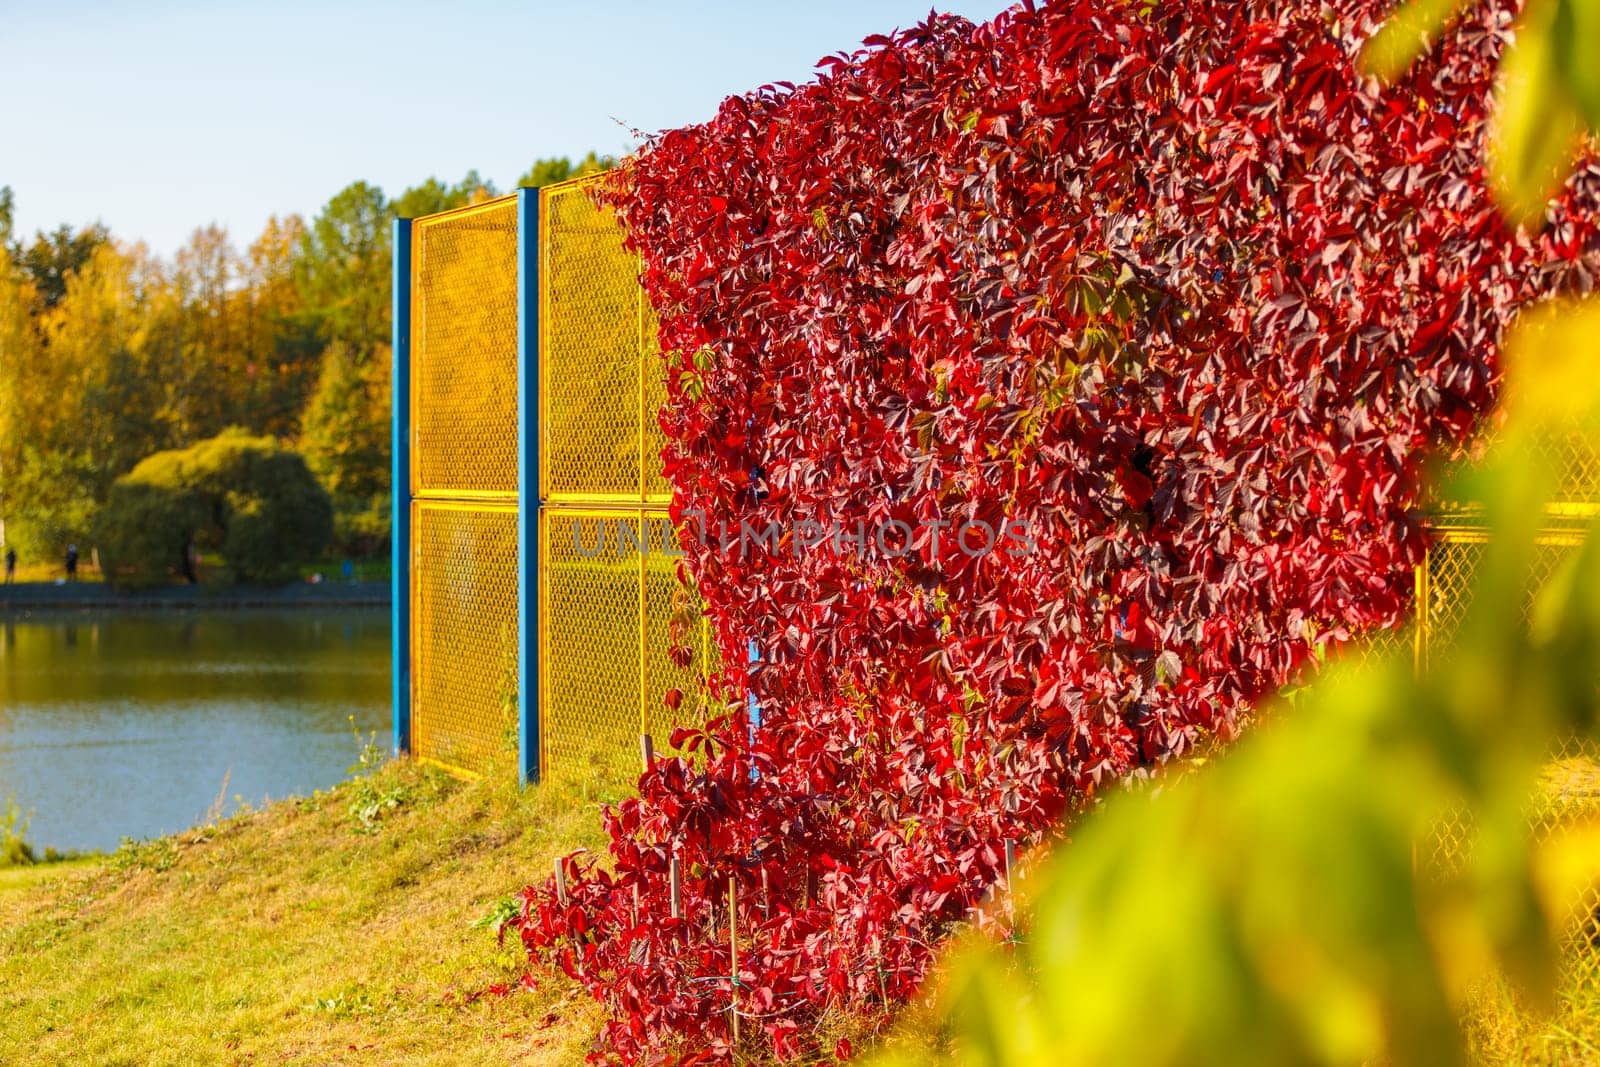 Red autumn ivy in the rays of the sun on the wall of a metal fence. by Yurich32